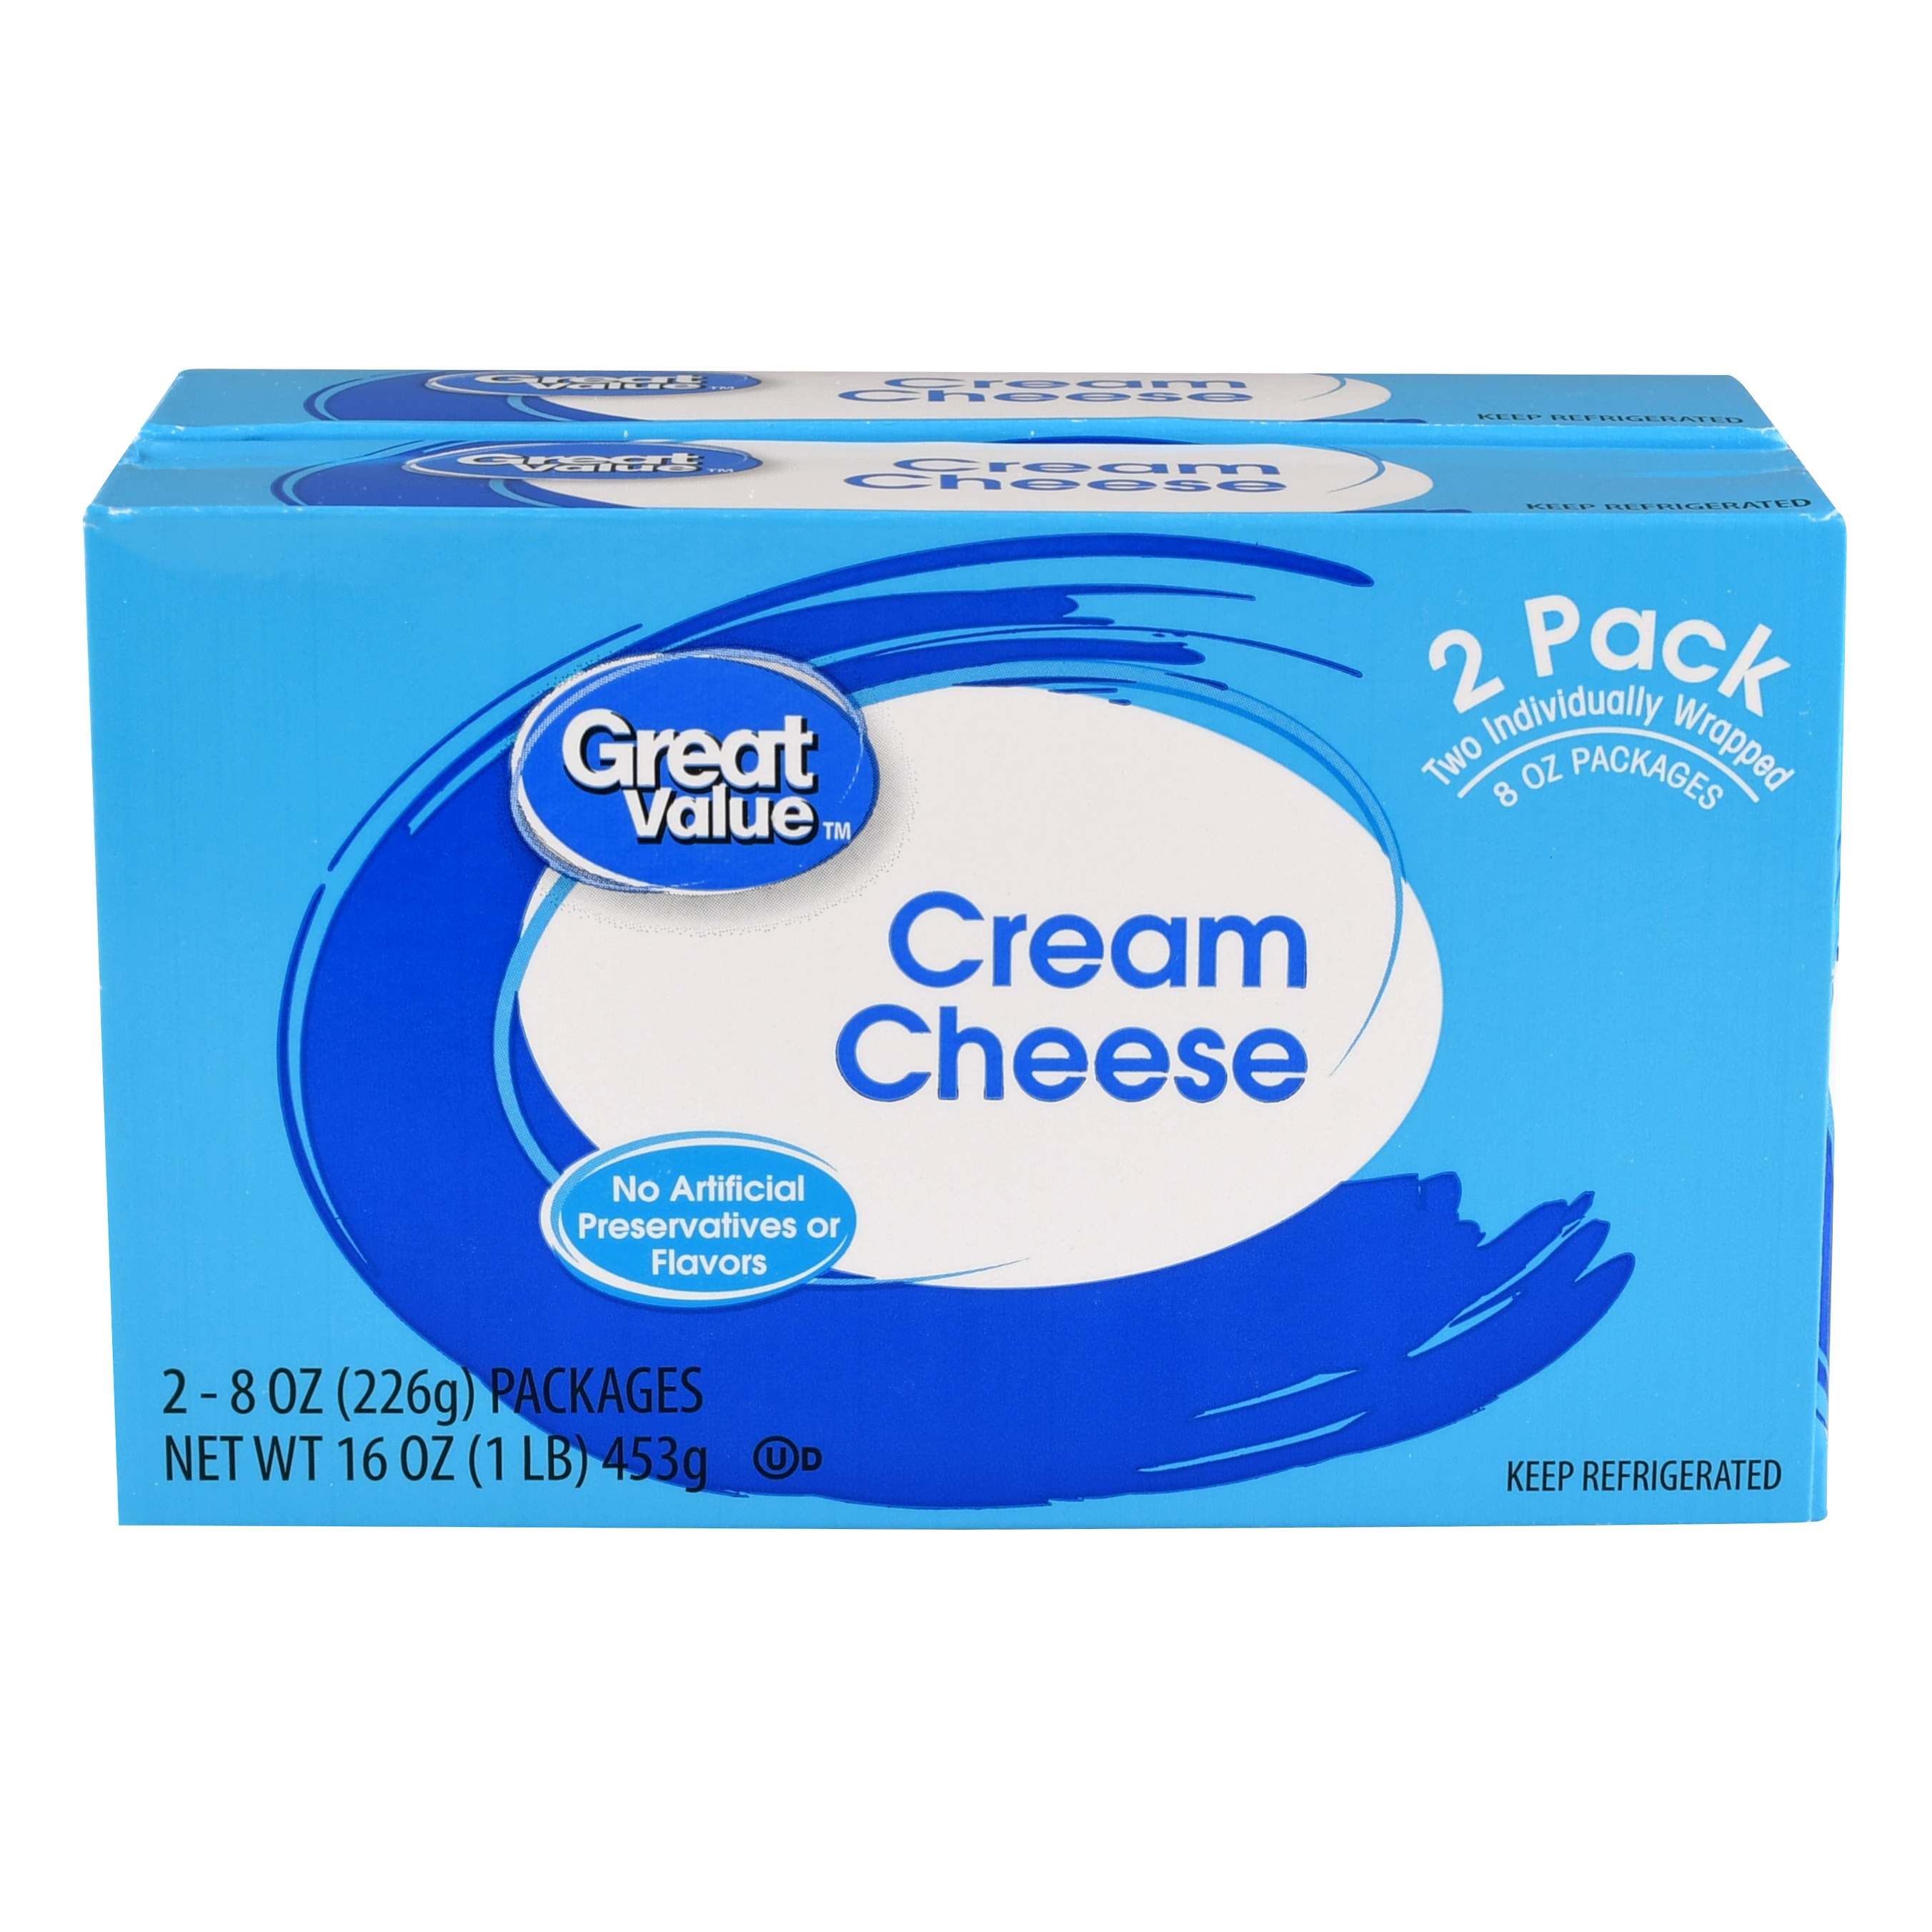 Great Value Cream Cheese 8 oz, 2 Count - image 1 of 7